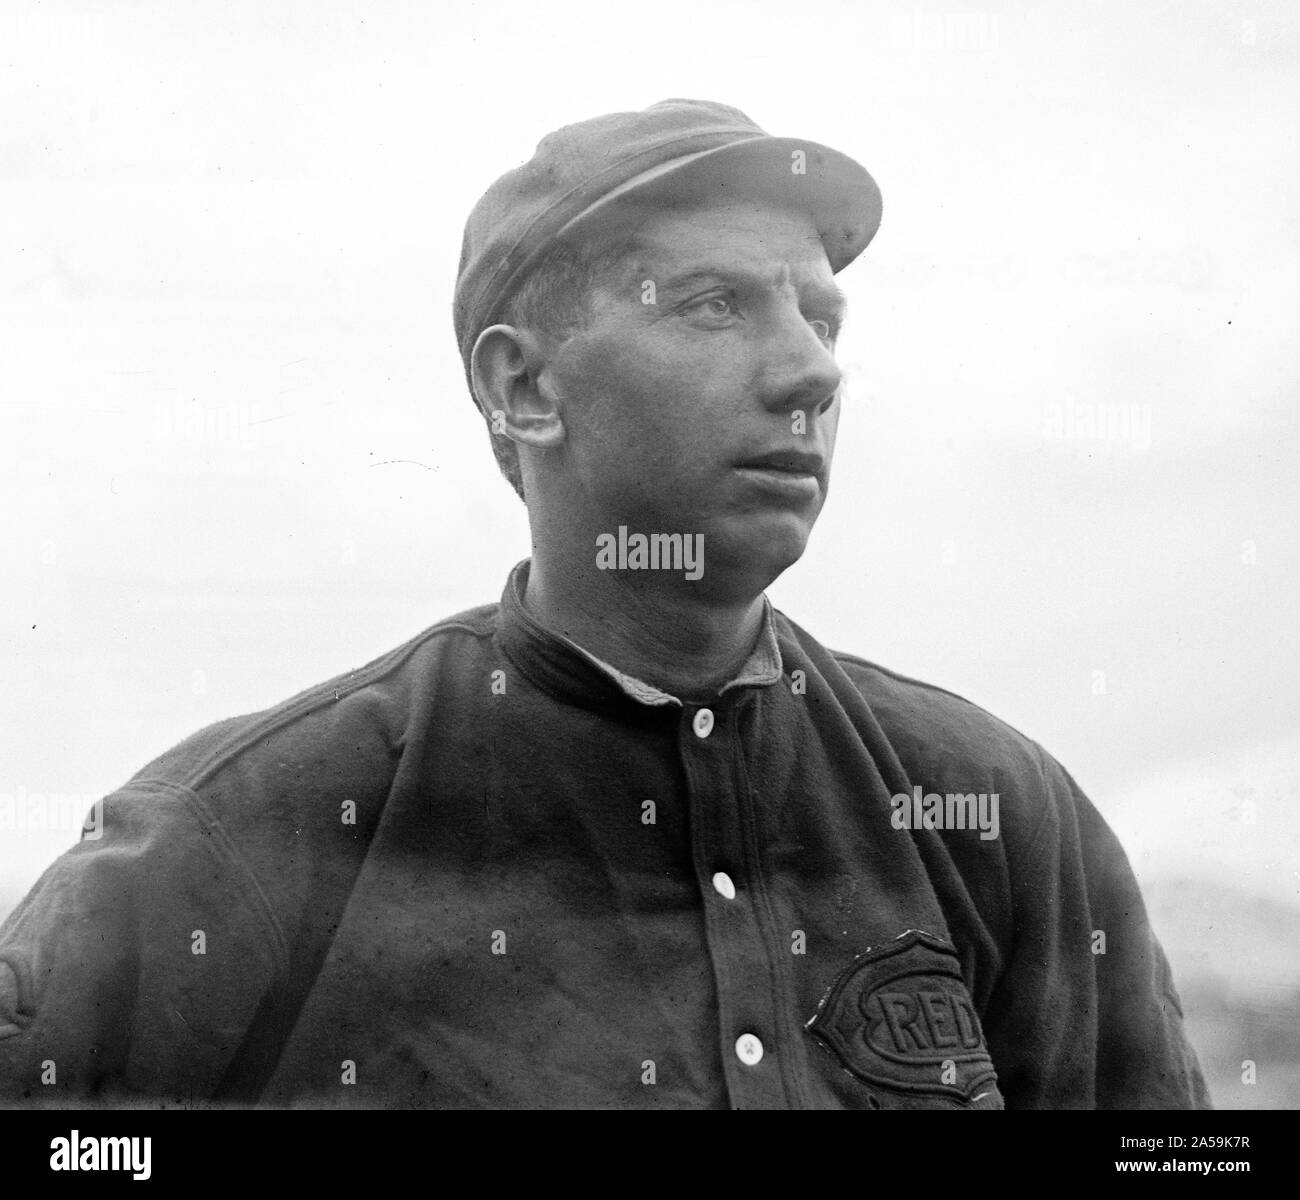 Photograph shows baseball player Arthur Henry Fromme (1883-1956), who was a pitcher in the Major Leagues from 1906-1915. Stock Photo